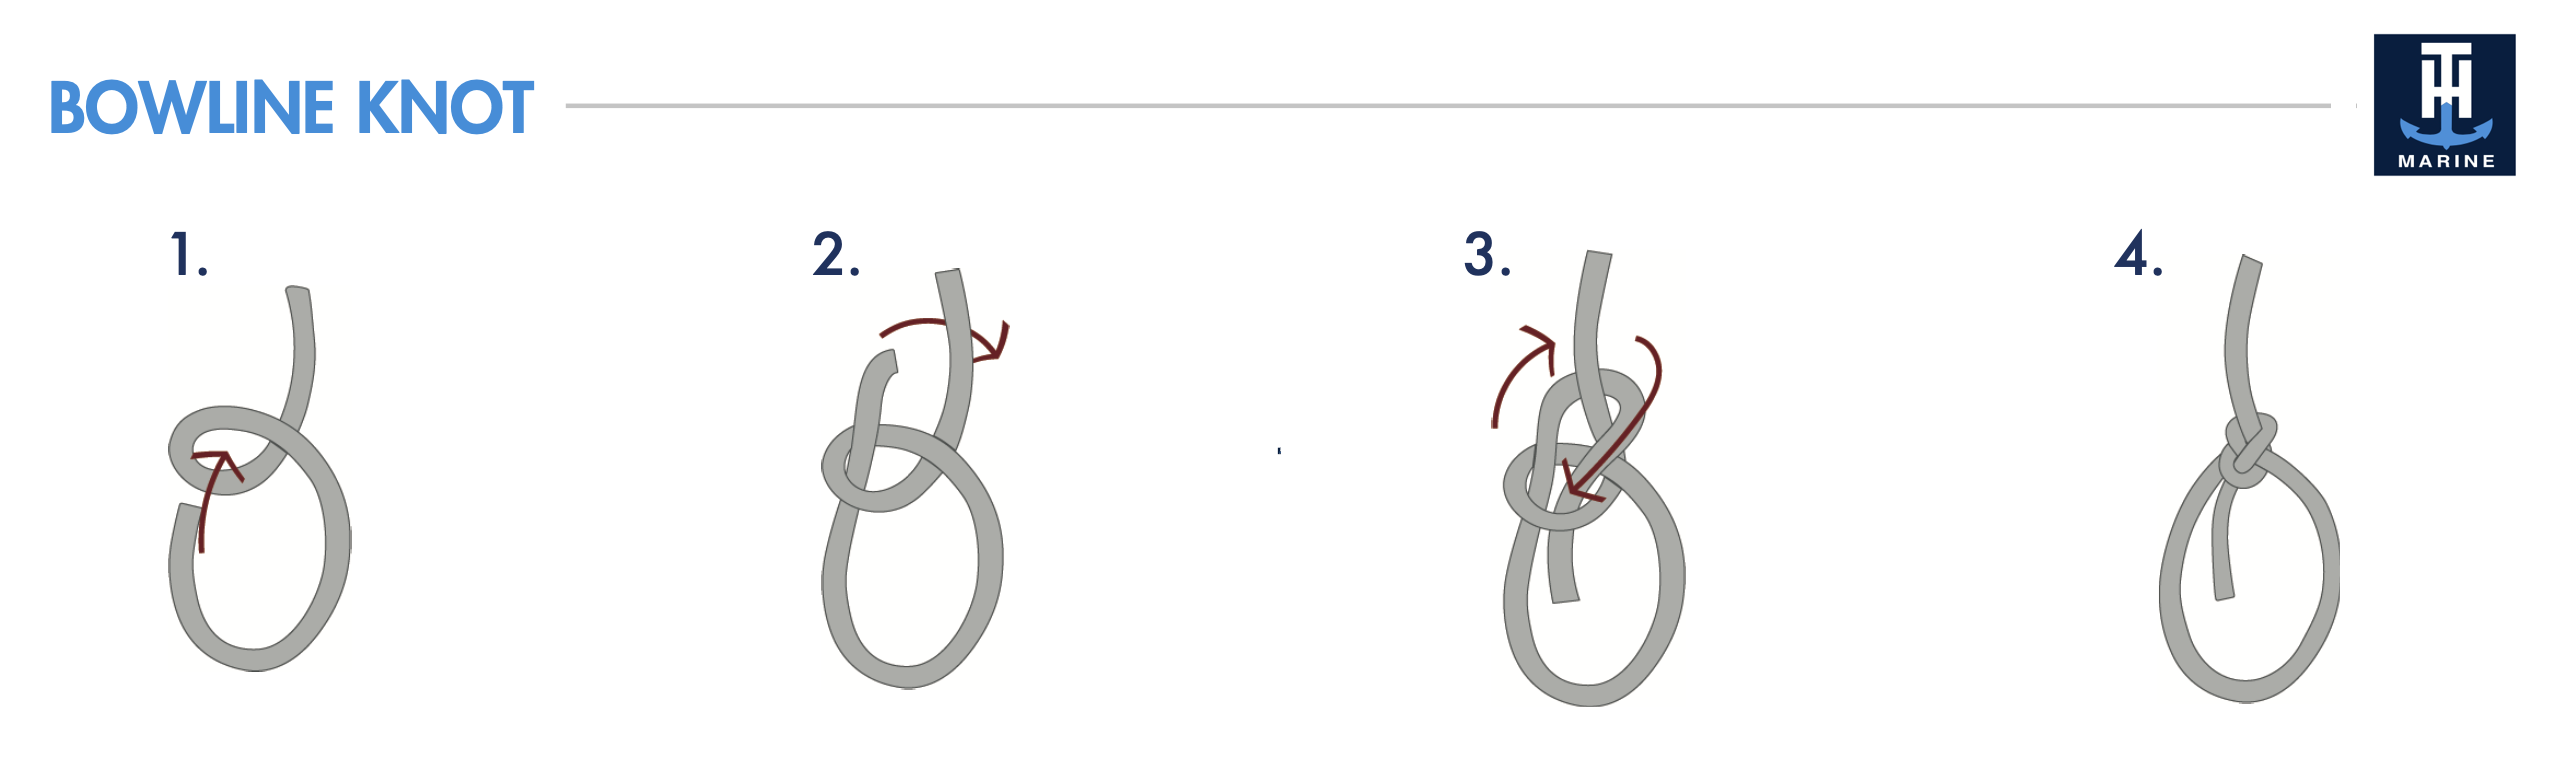 Bowline Knot - T-H Marine Boating Knots to Know